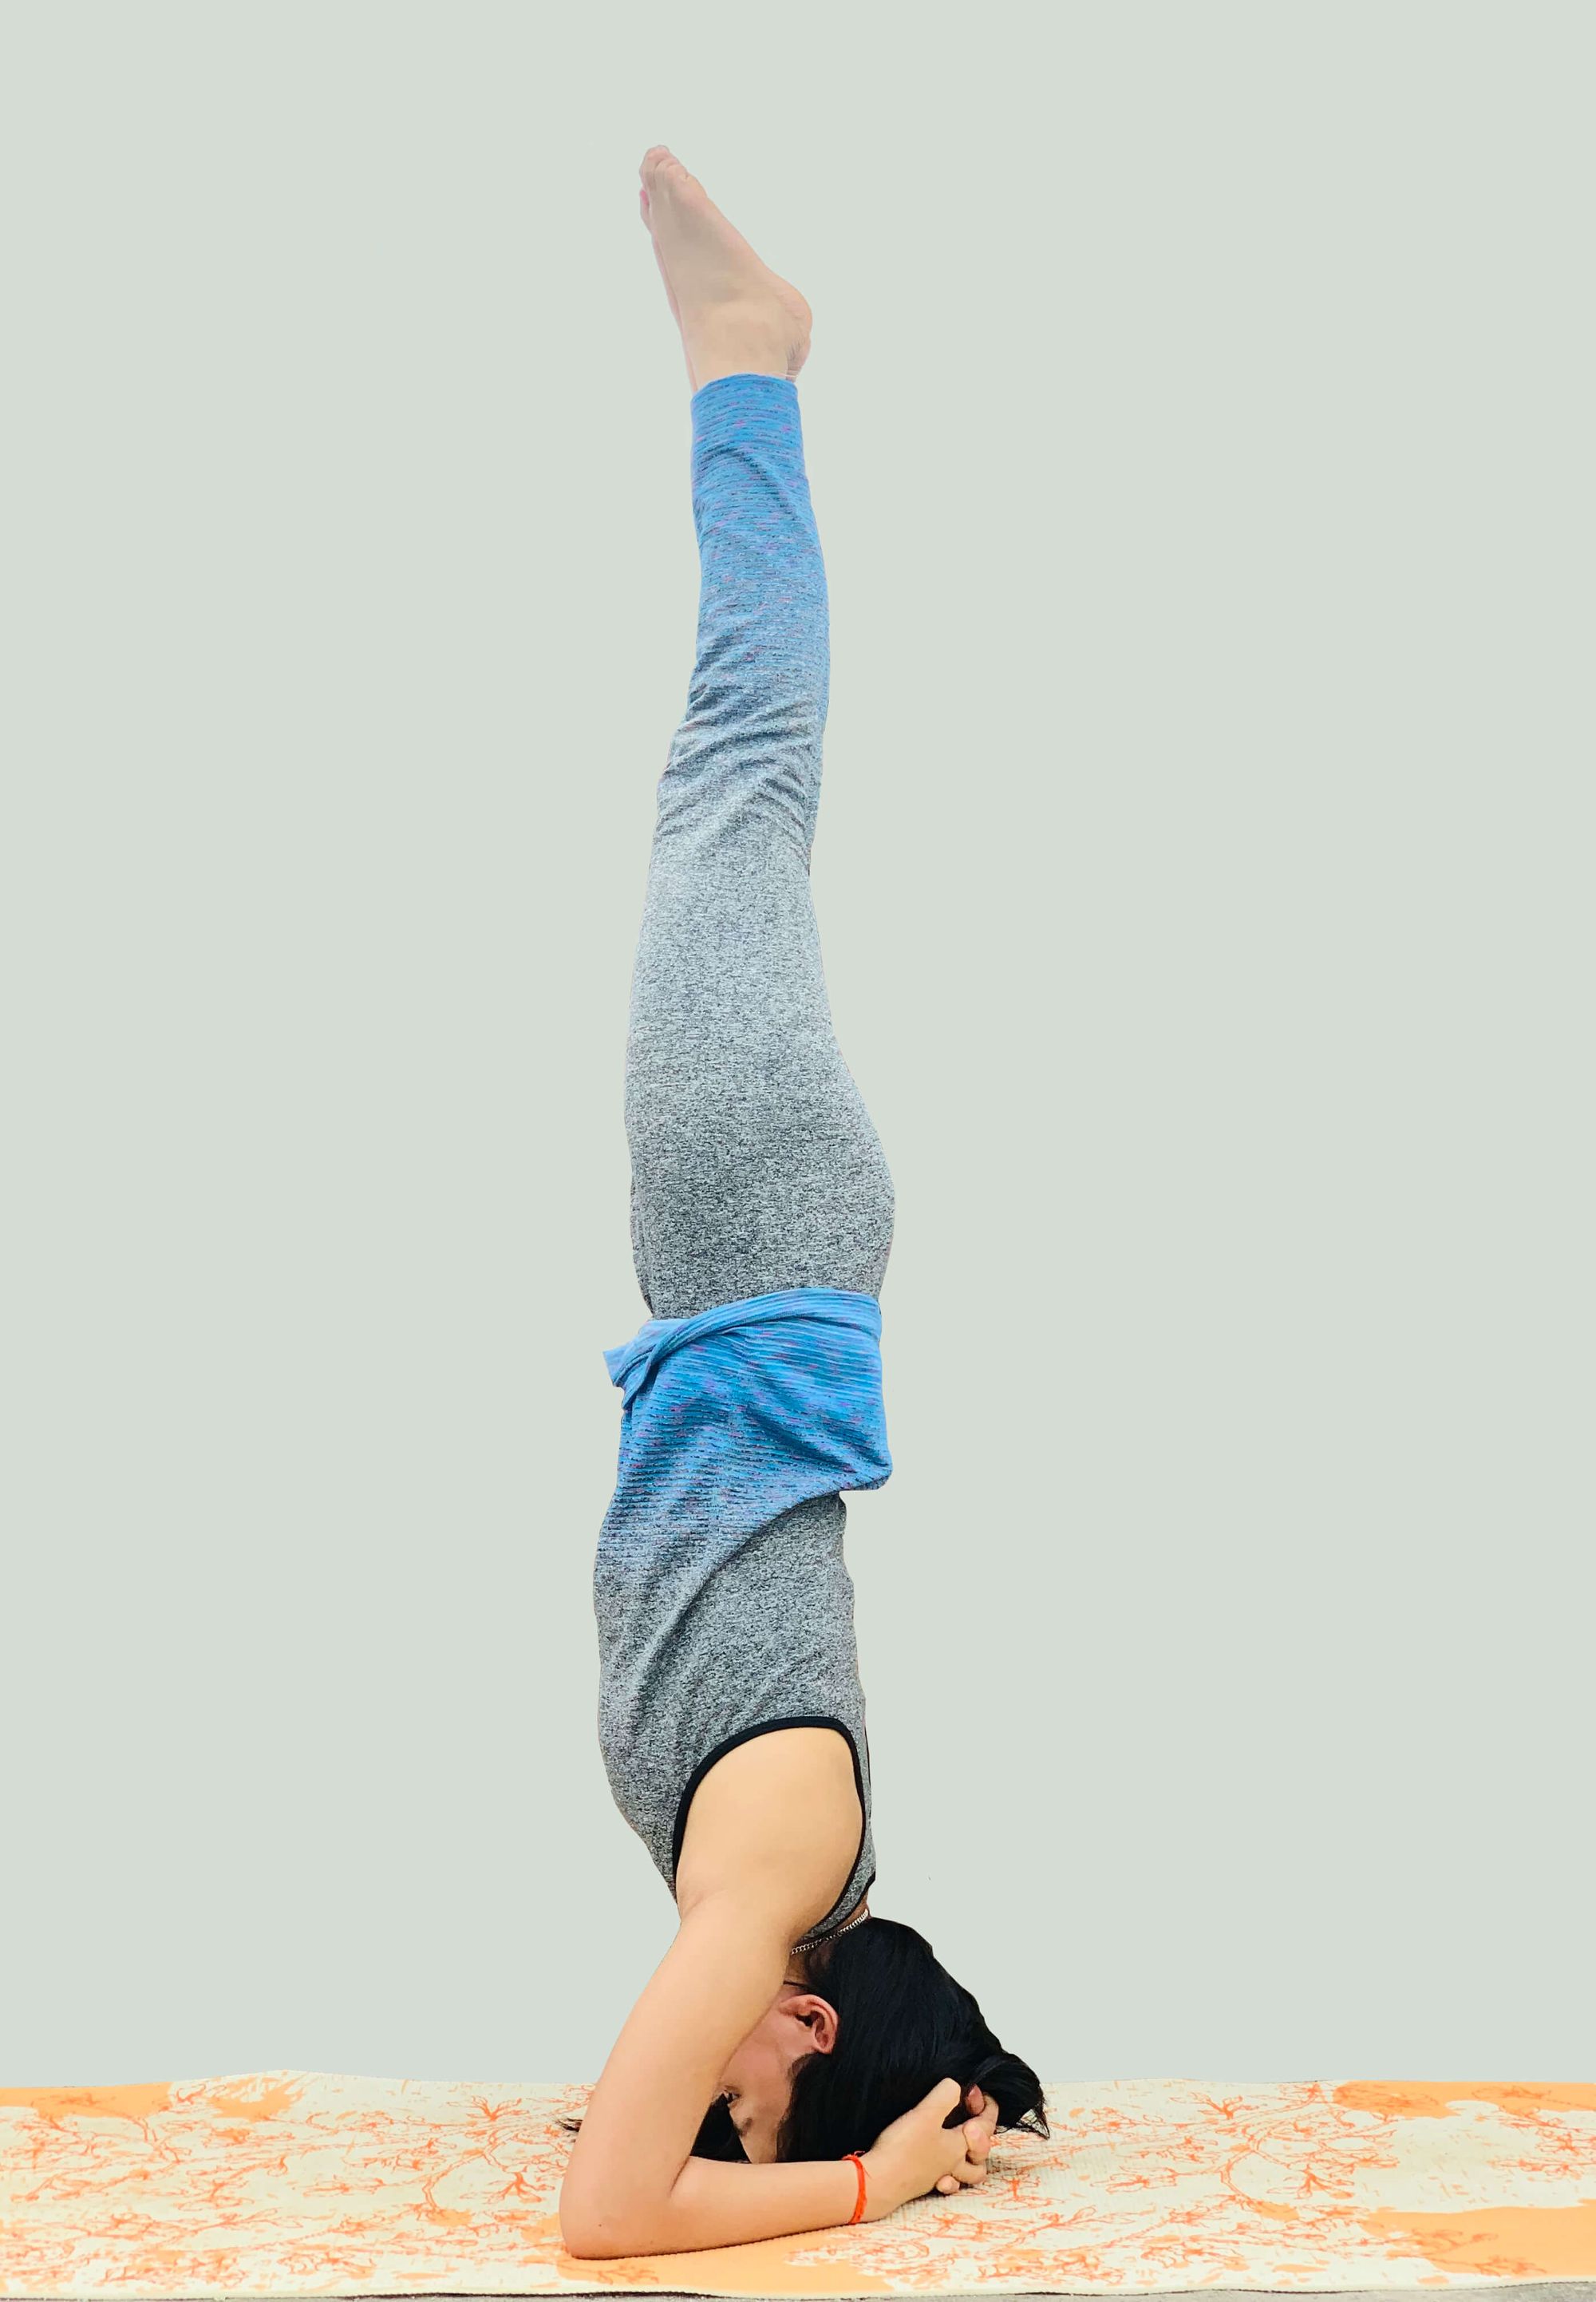 Top tips to master a headstand - Skill Yoga